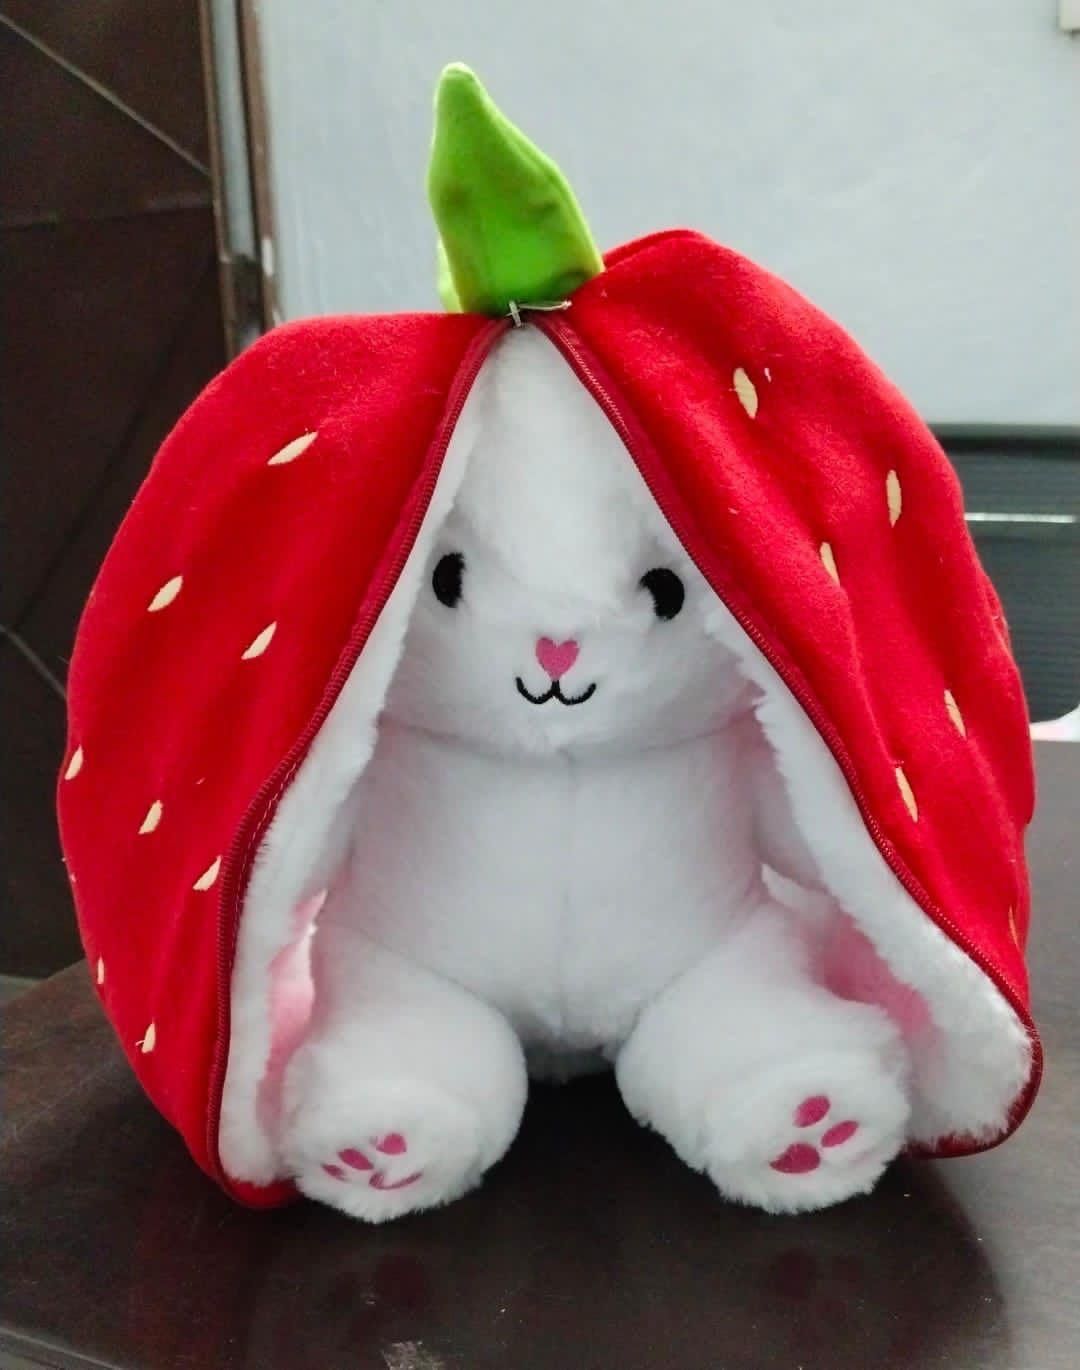 🍓🍓Strawberry Bunny Transformed into Little Rabbit🎀 Fruit Doll Plush Toy🐰🐰